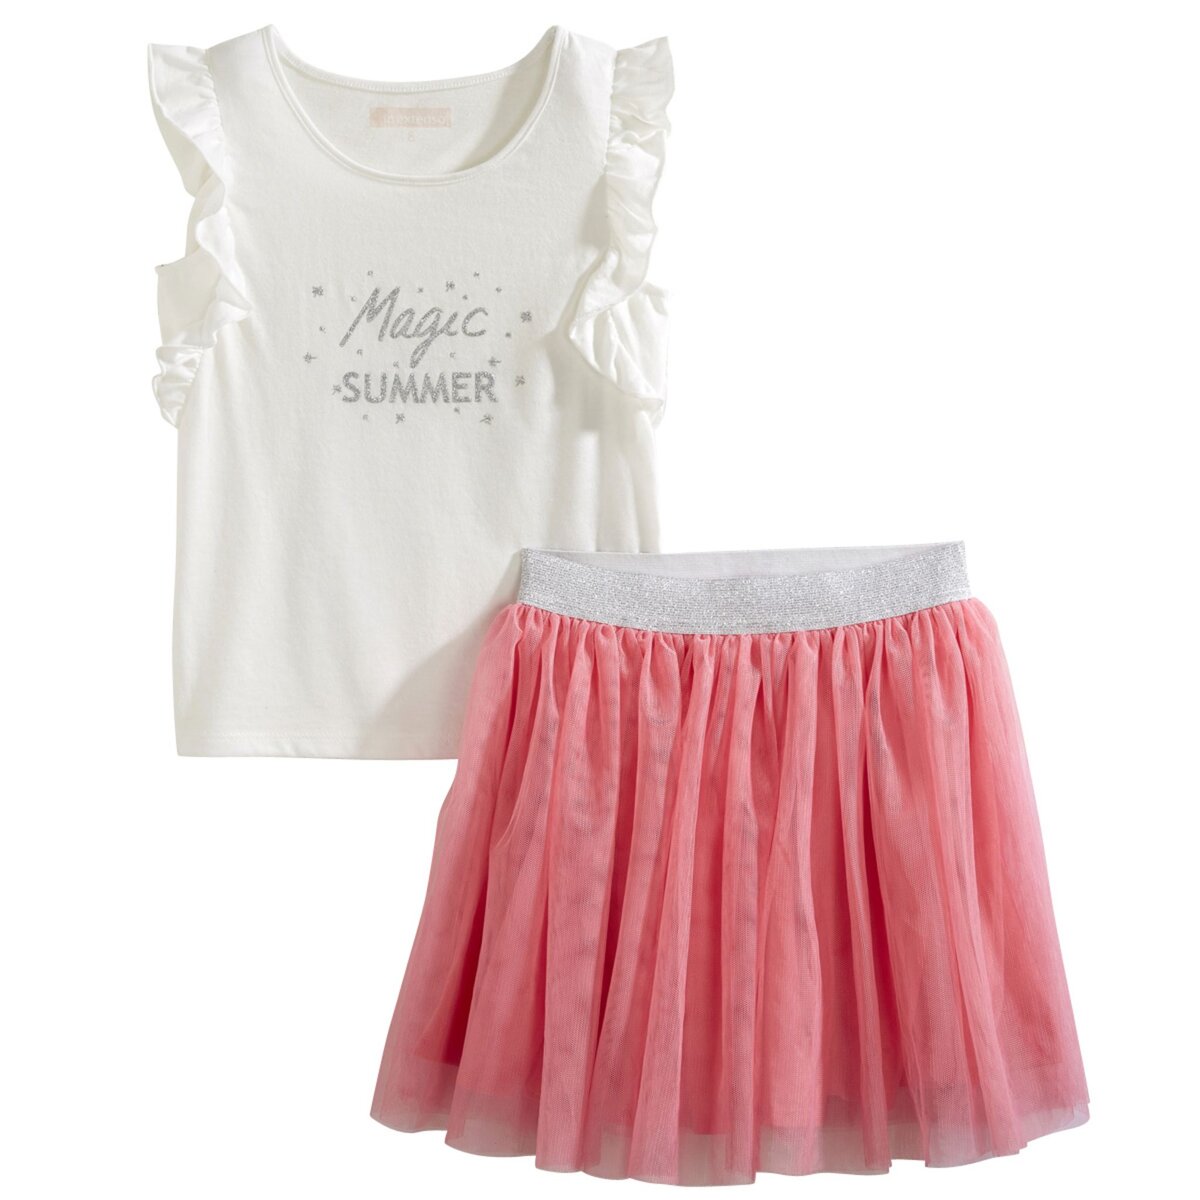 IN EXTENSO Ensemble tee shirt + jupe tulle fille